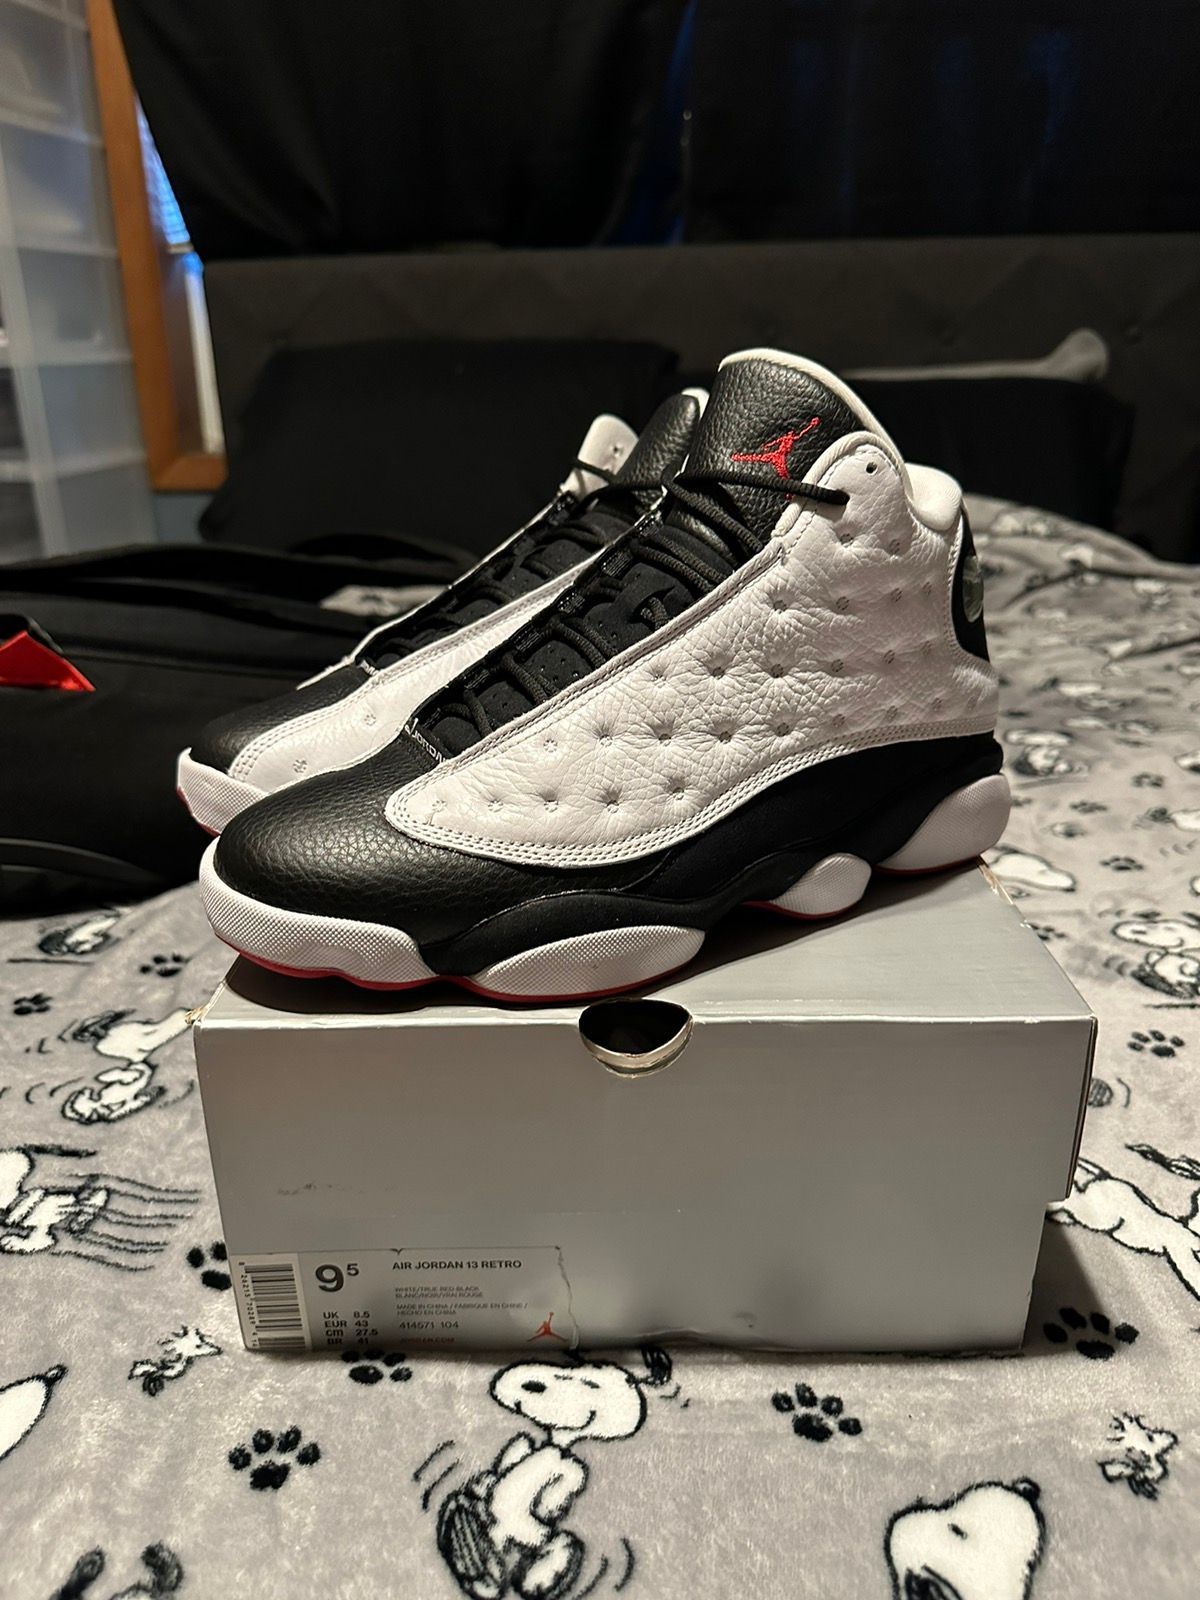 Pre-owned Jordan Brand 13 He Got Game 2018 Size 9.5 Shoes In Black